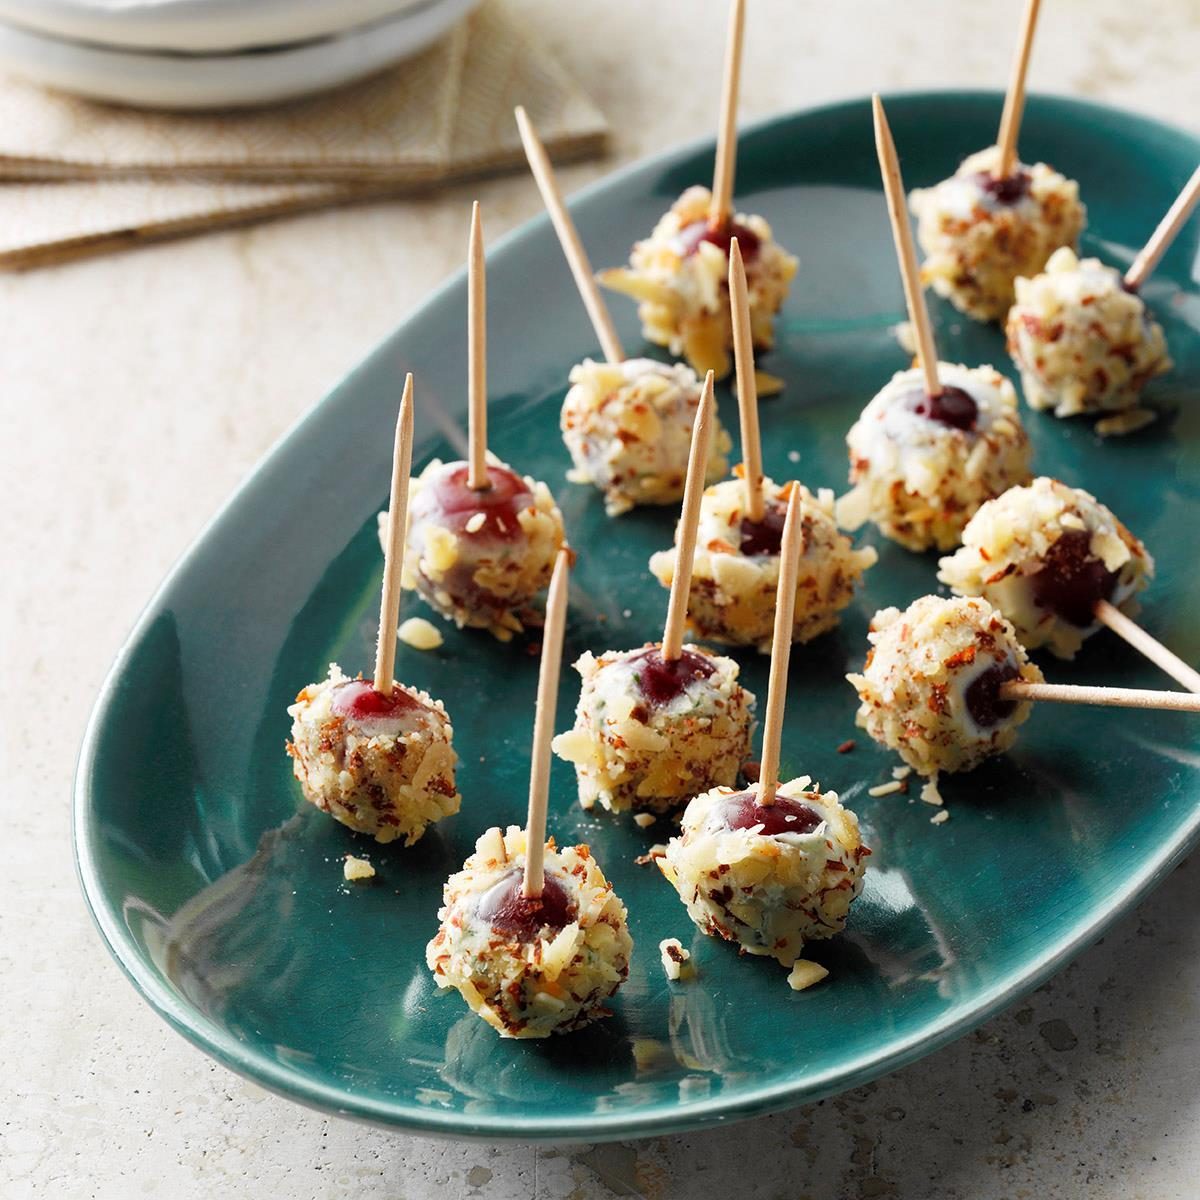 32 No-Cook Appetizers That Make Entertaining Quick and Easy